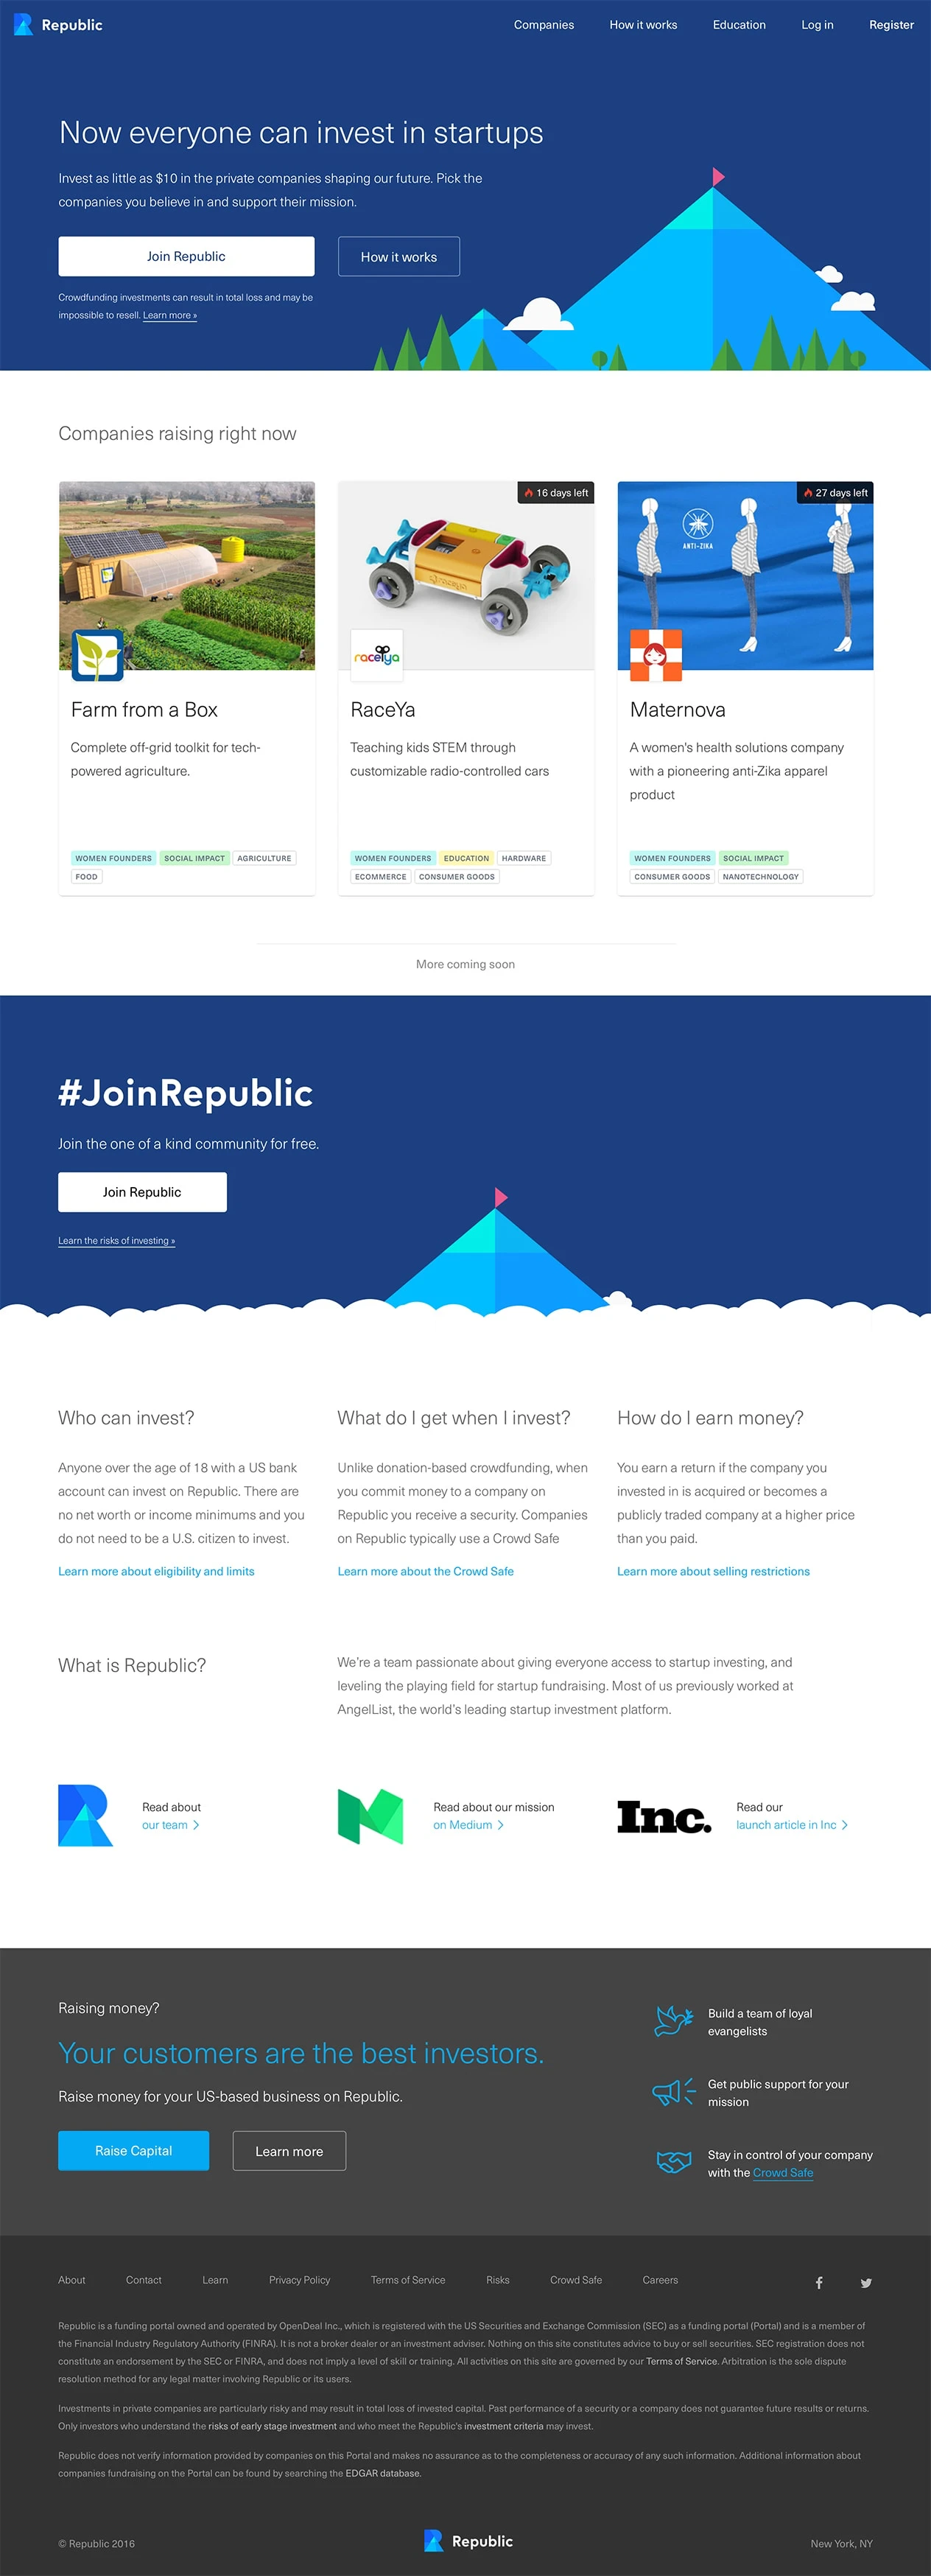 Republic Landing Page Example: Invest in impactful startups raising money via equity crowdfunding